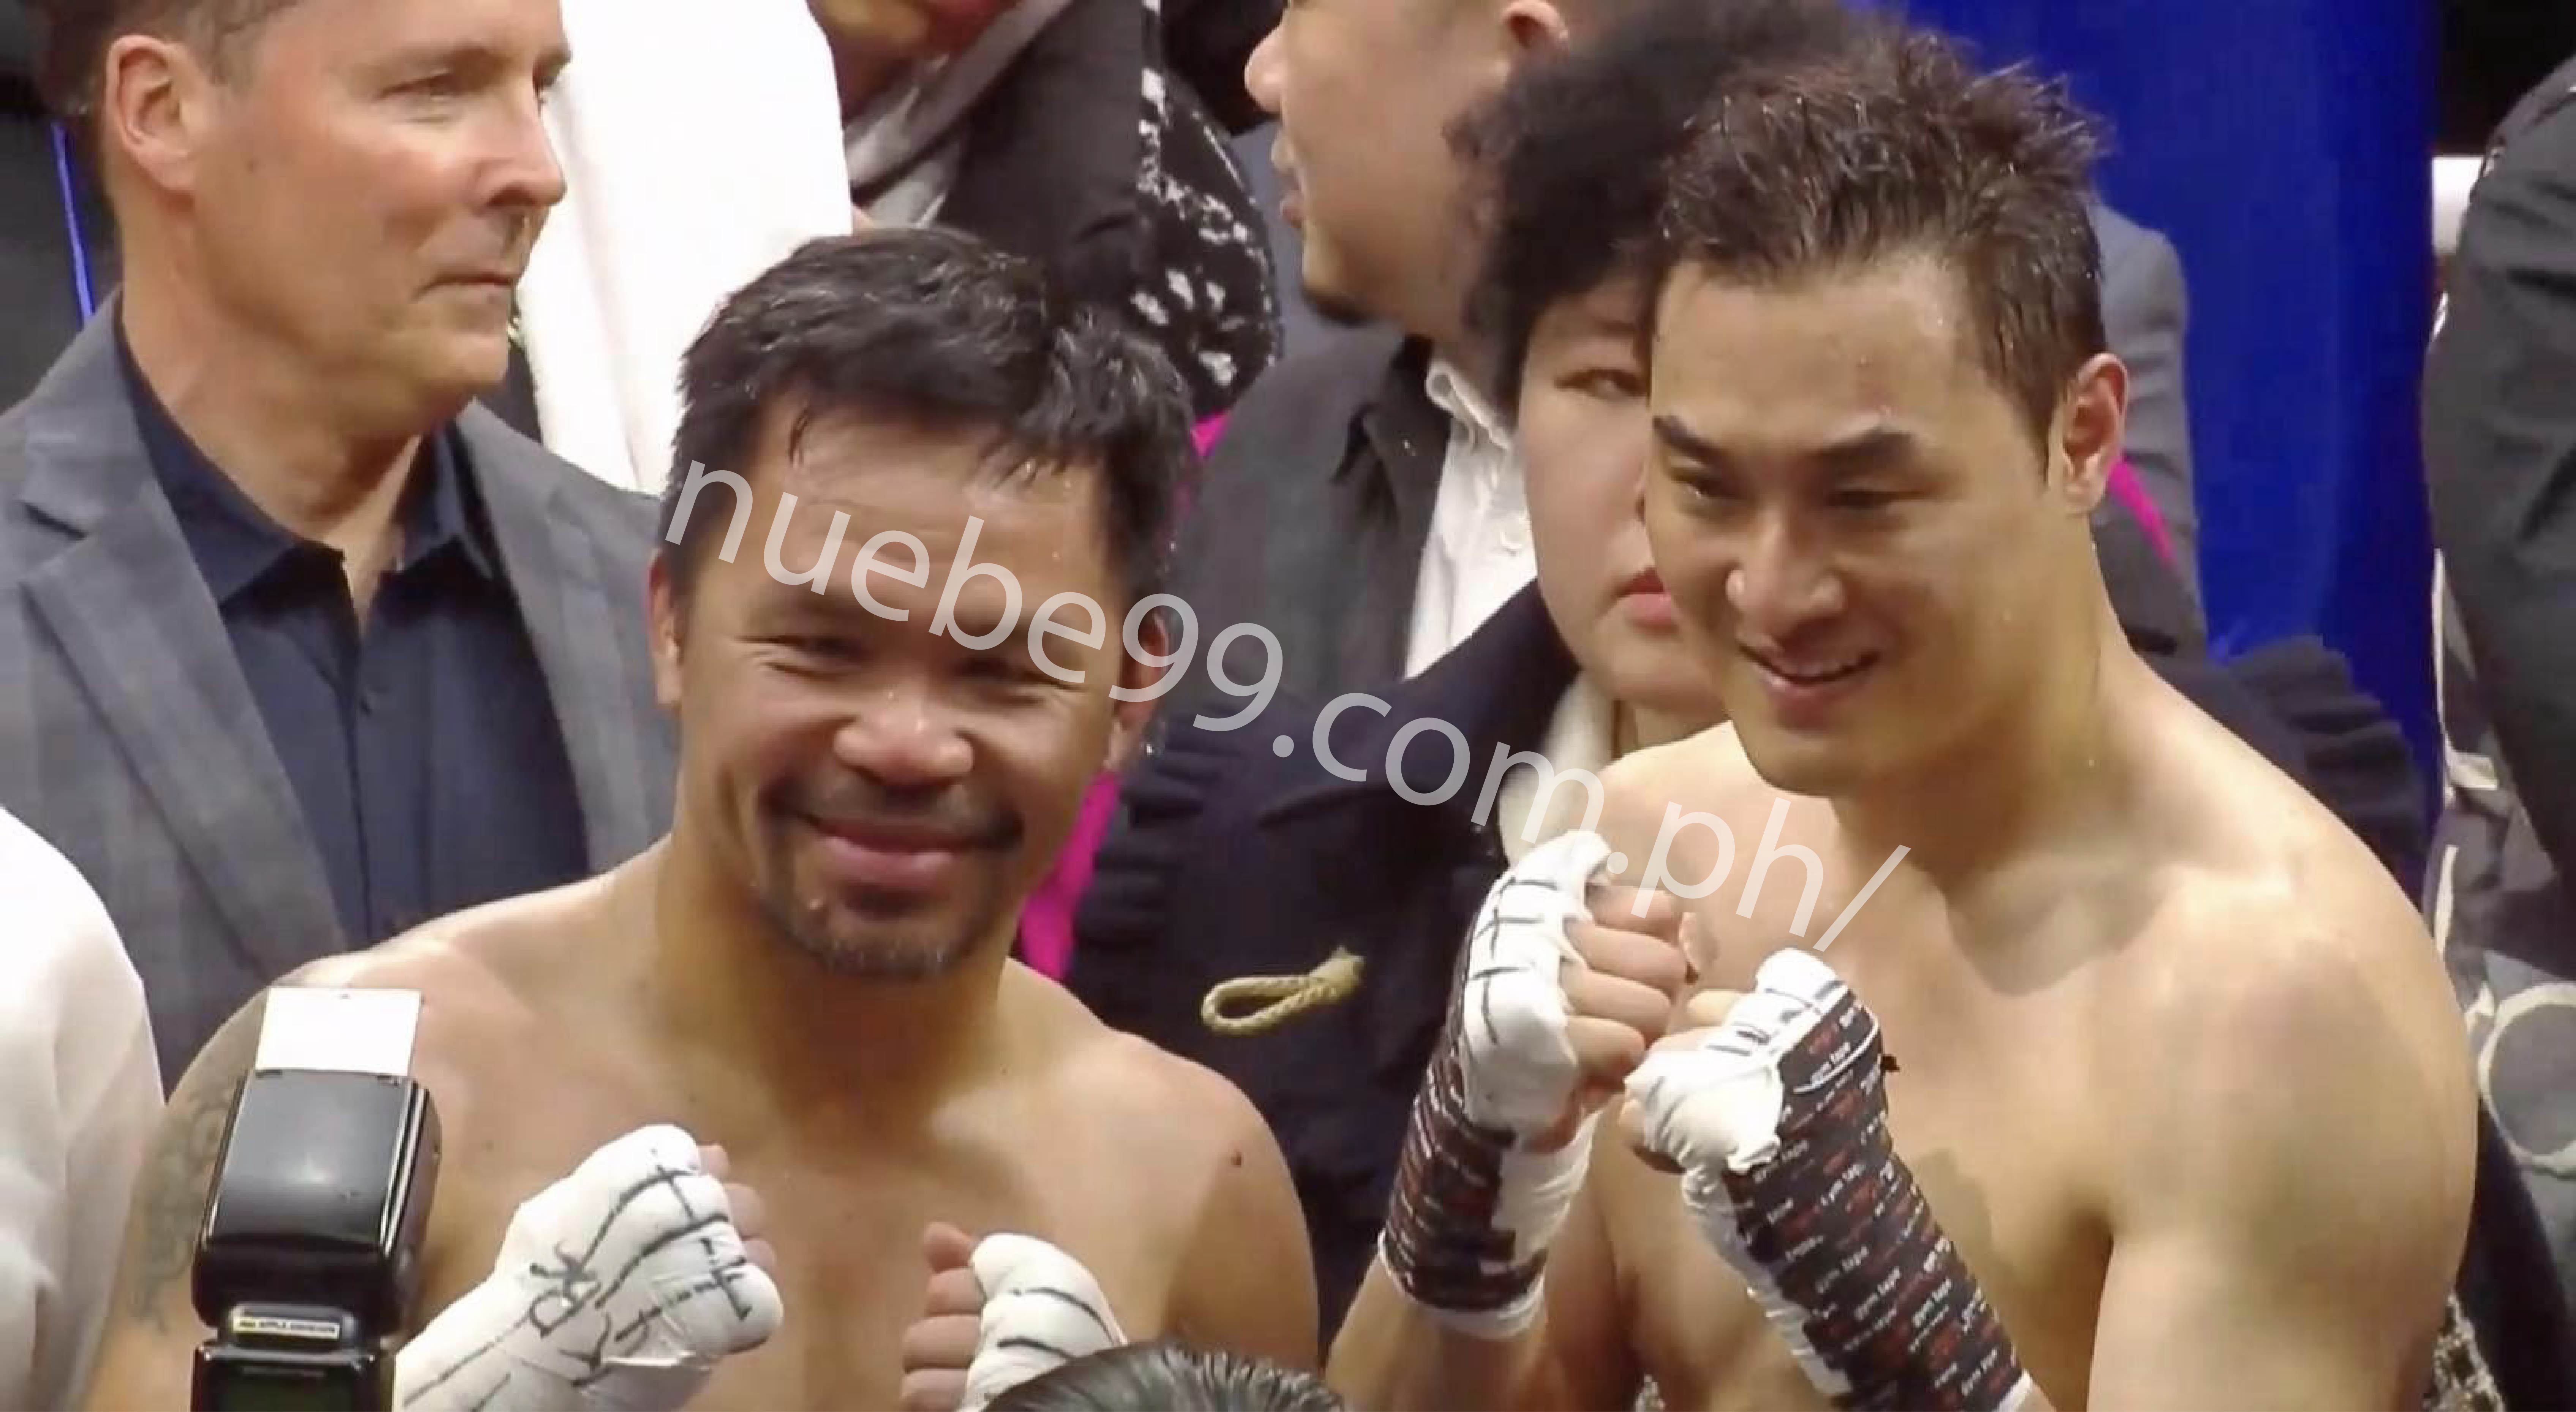 Pacman Manny with another boxer